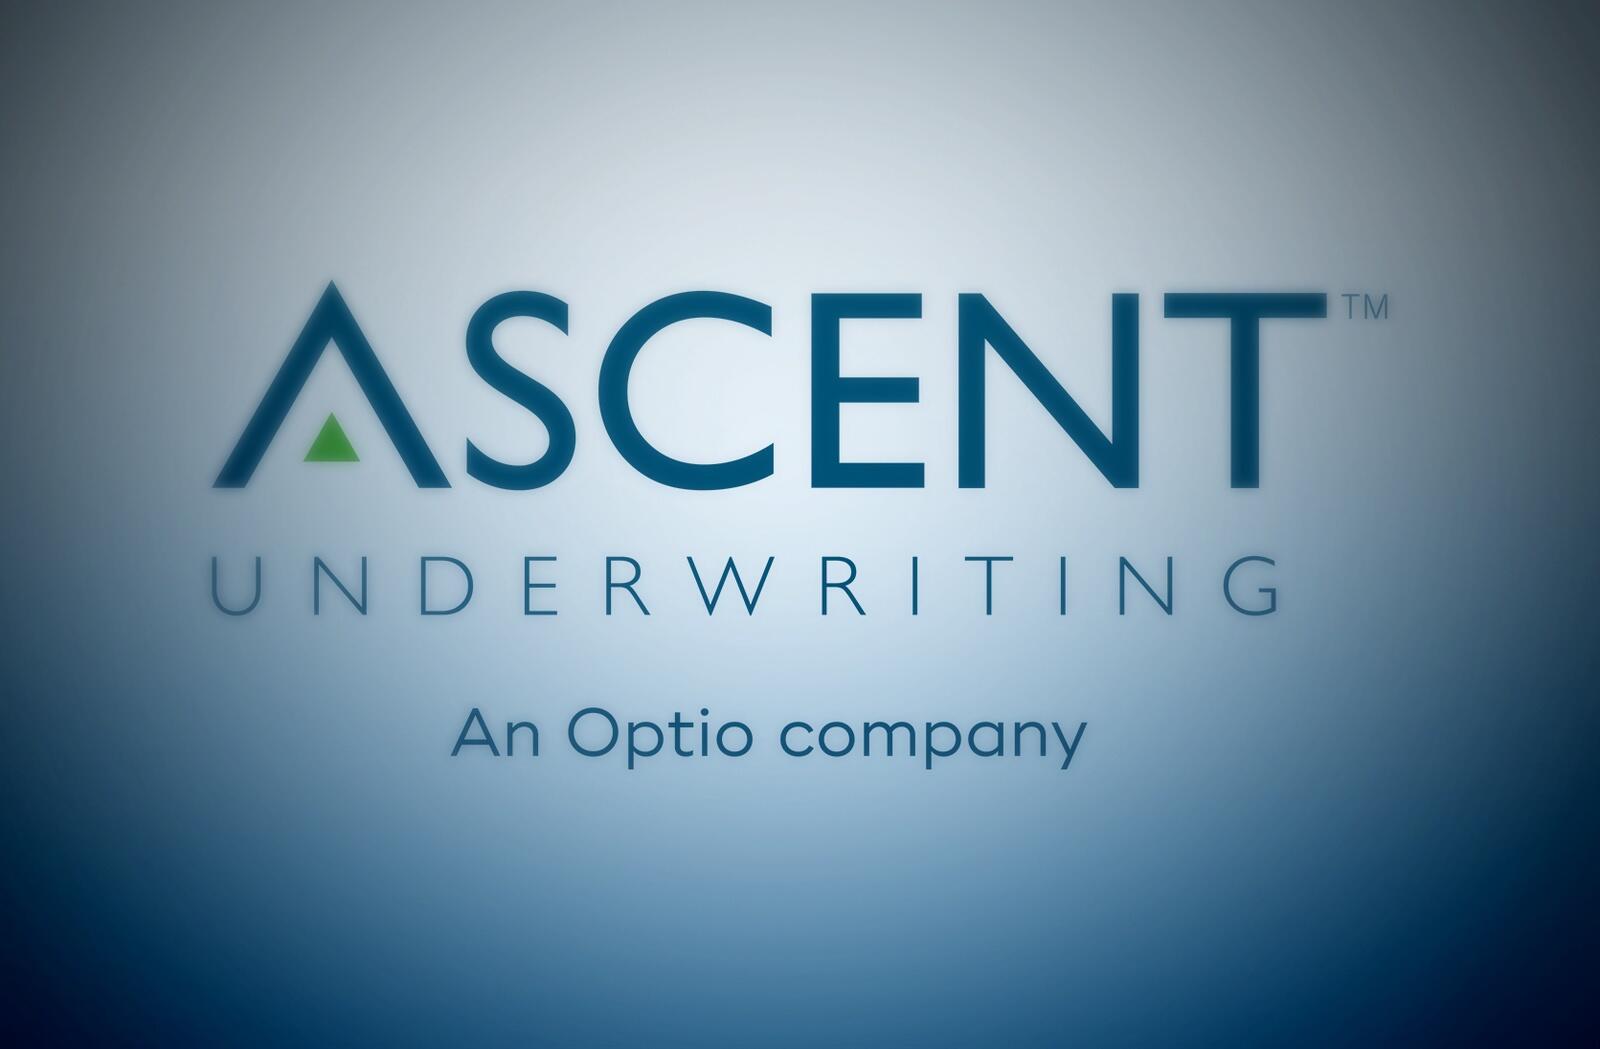 Ascent Underwriting